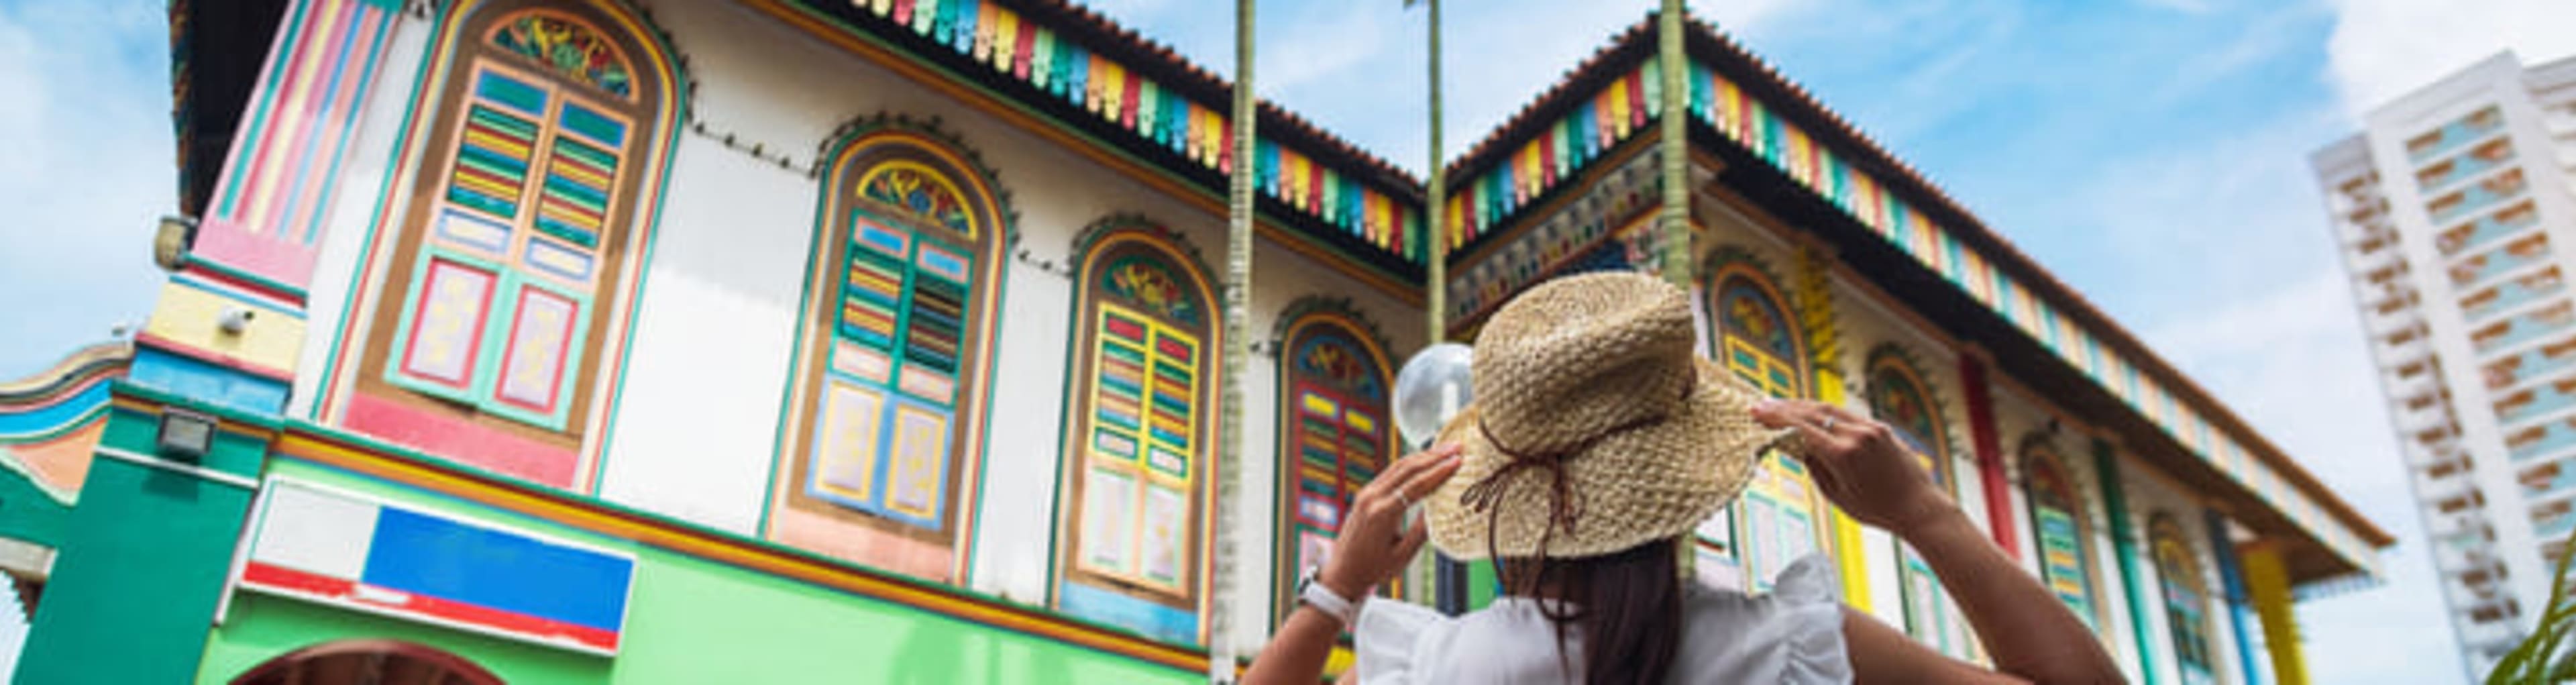 Woman exploring colorful buildings in Singapore's Little India neighborhood